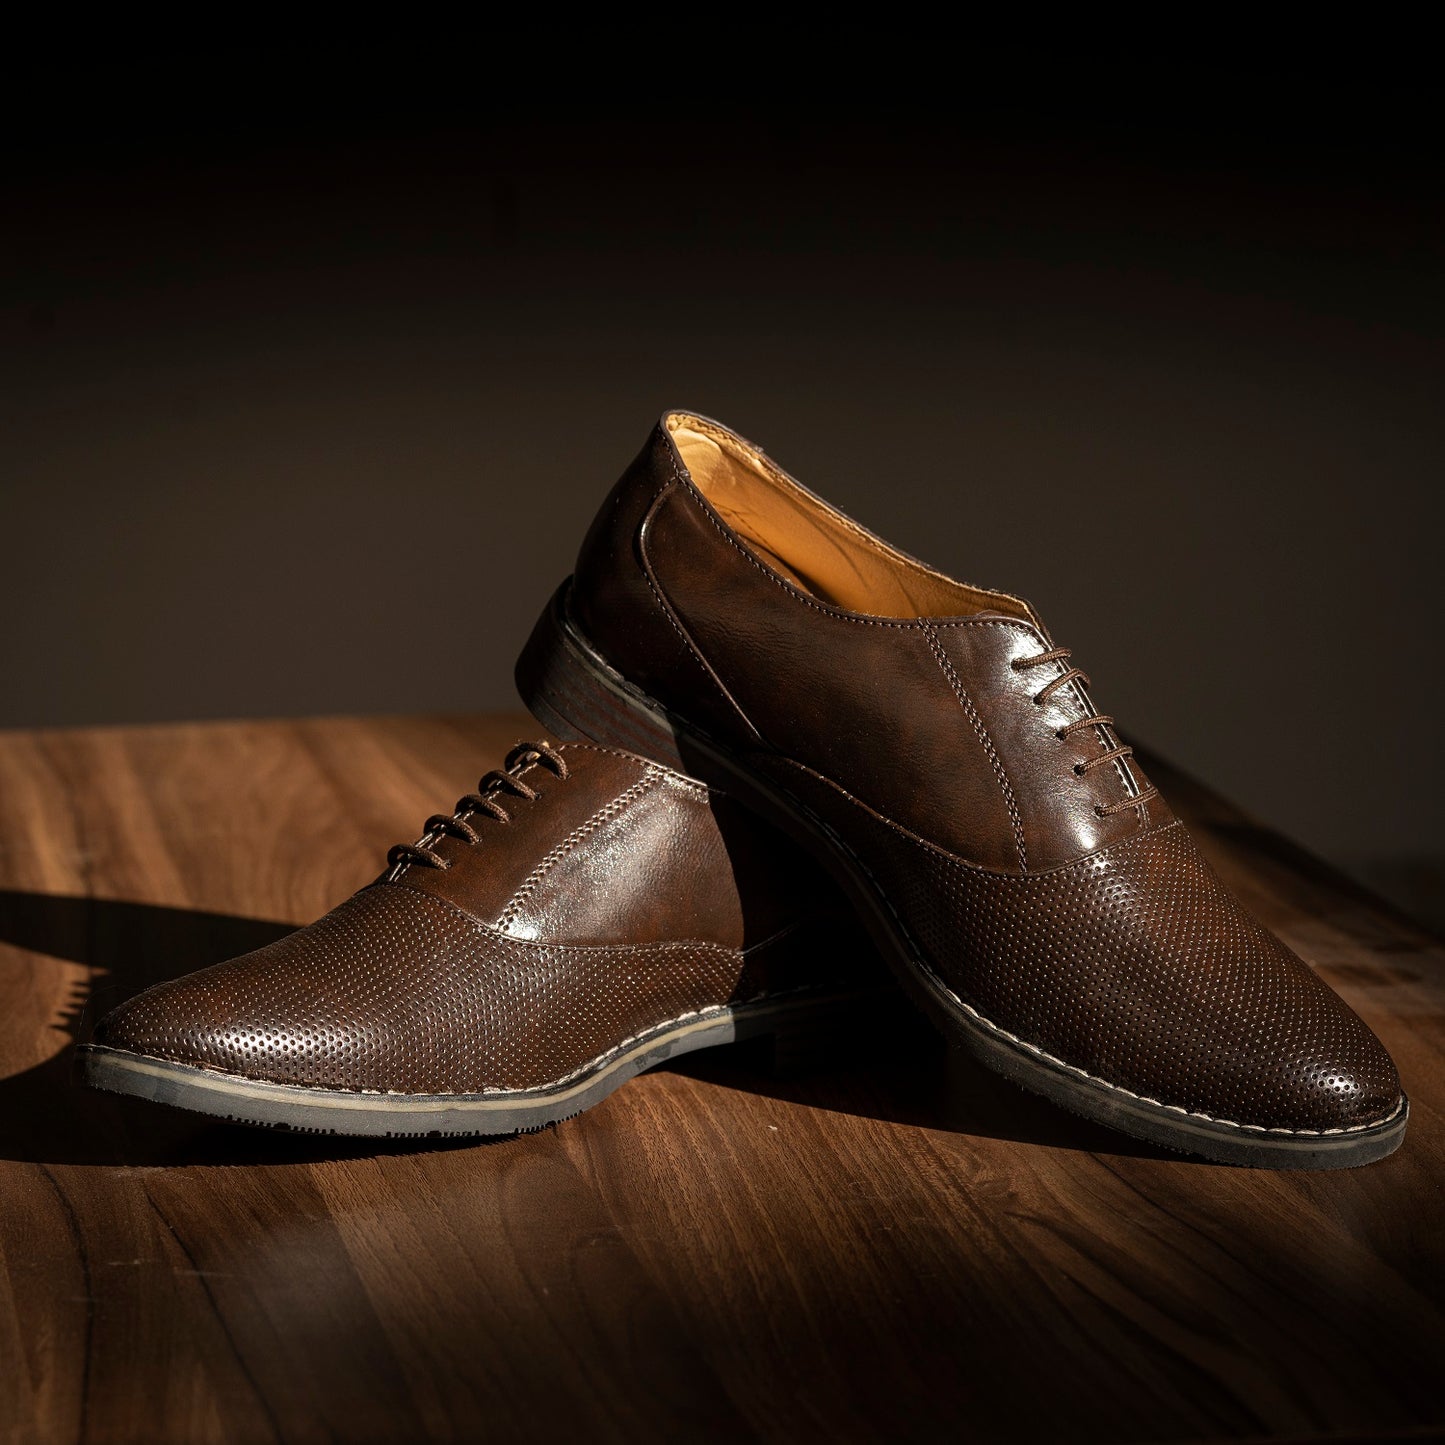 The Aurous Orion Oxford Formal Laceup Derby Shoes With Dotted Texture